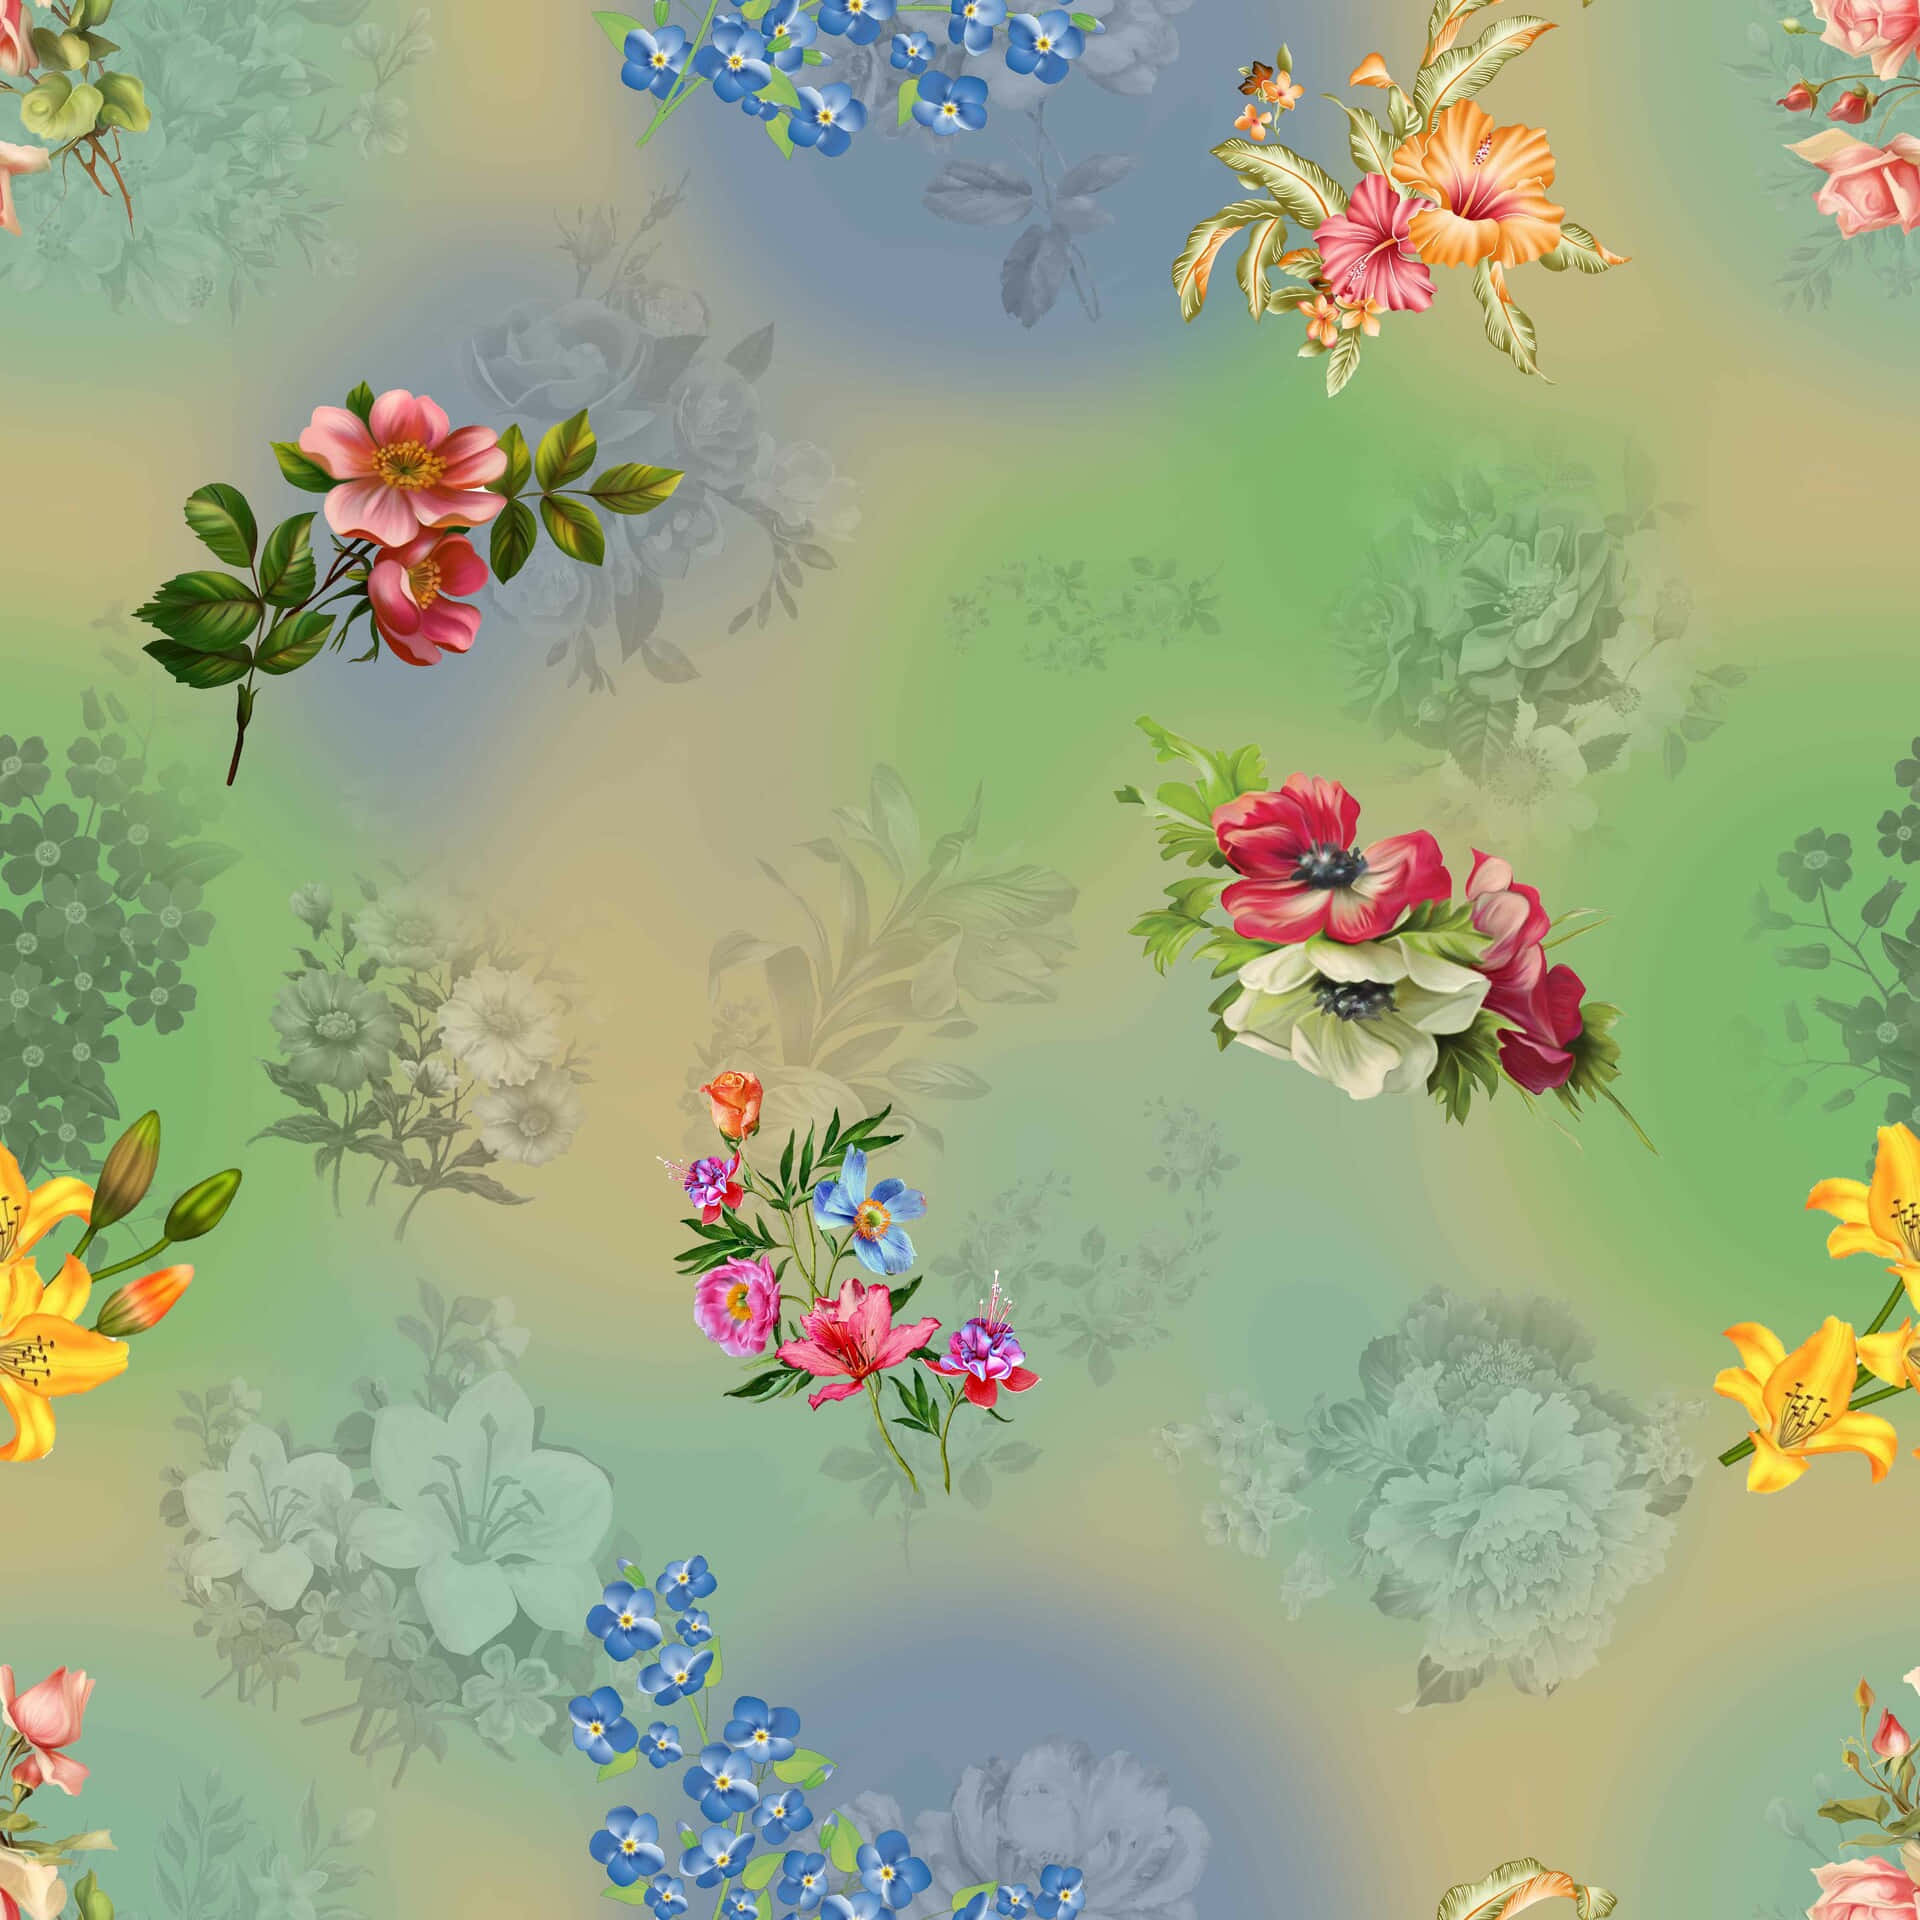 A Floral Pattern With Many Different Flowers